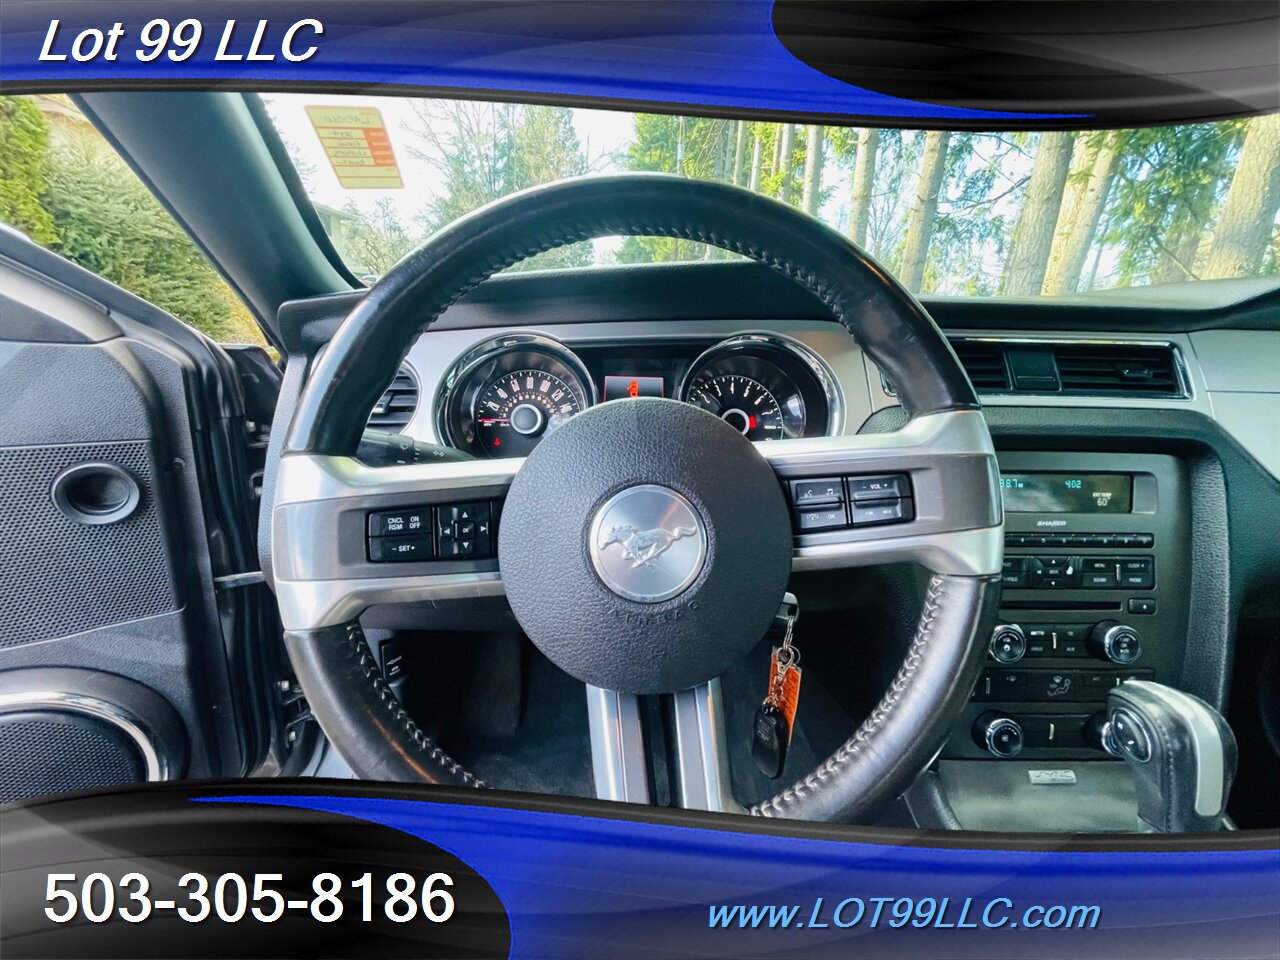 2014 Ford Mustang V6  3.7L V6 305hp  145k Miles Auto, 6-Spd SelectSh   - Photo 24 - Milwaukie, OR 97267